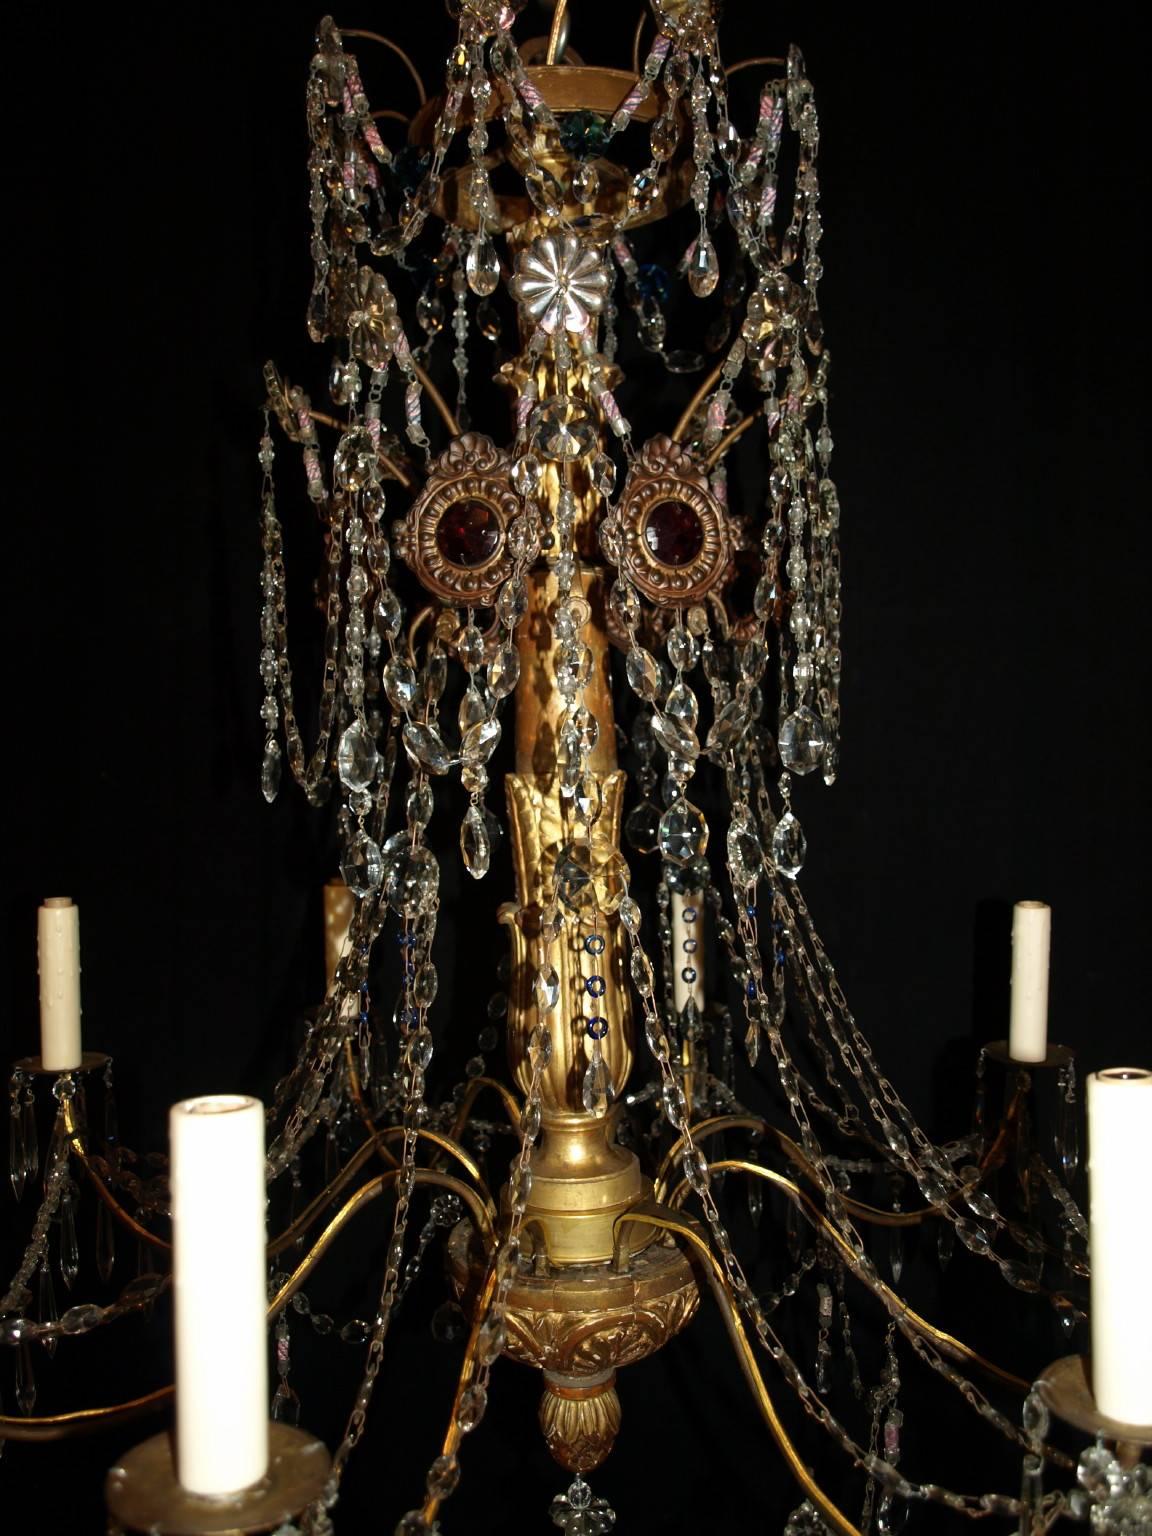 Early 19th century Genovese chandelier, originally for candles, now electrified with eight lights.